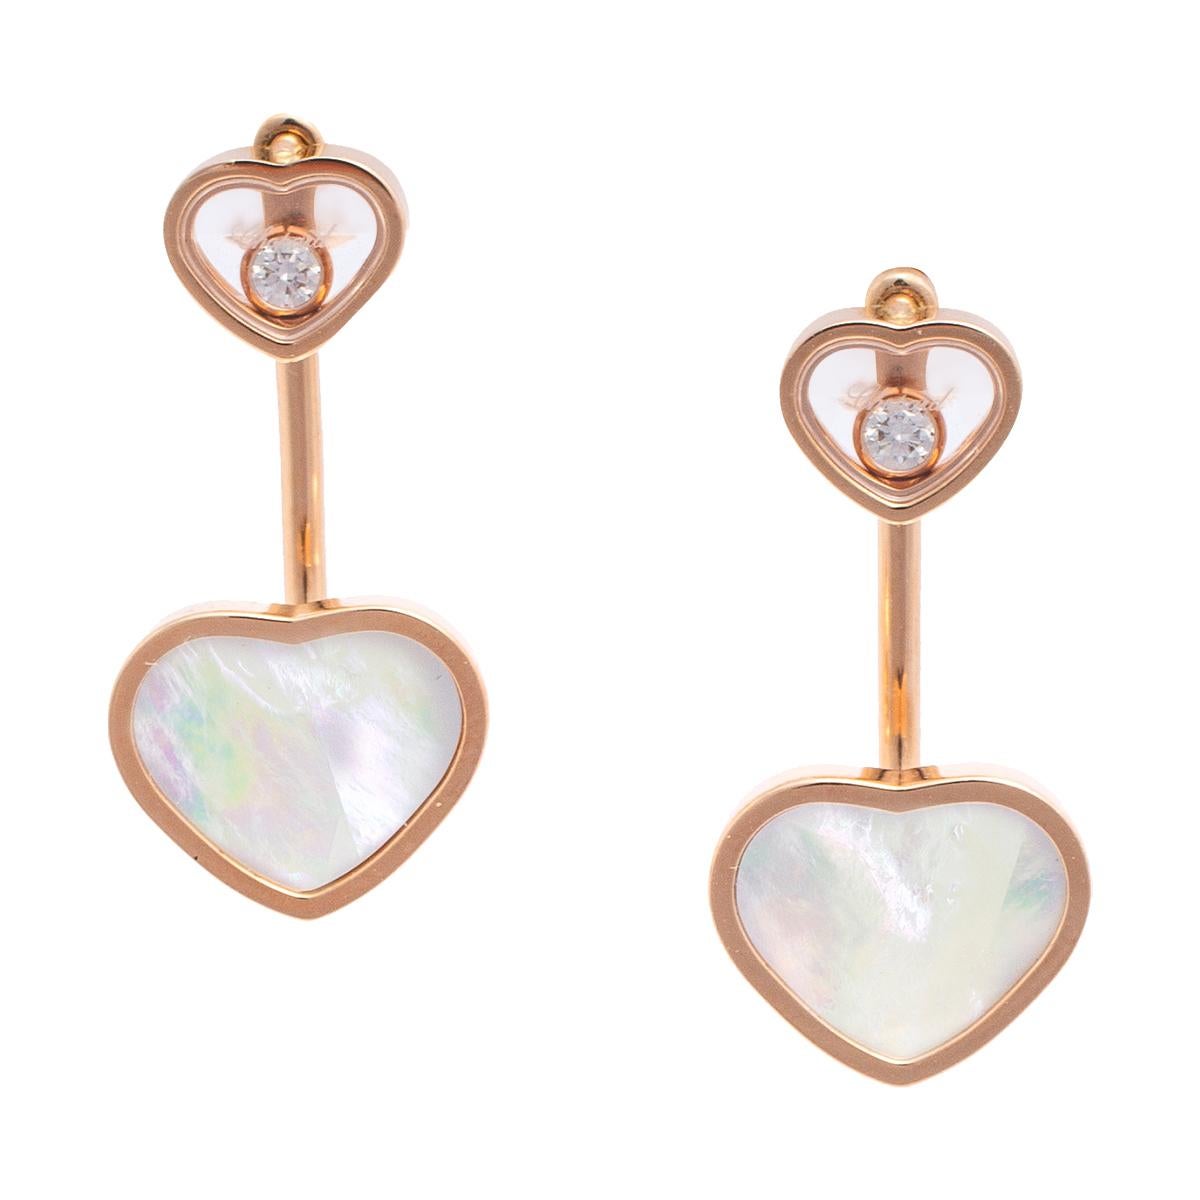 These Happy Hearts earrings by Chopard are suspended gracefully with delicate two graduating heart-shaped motifs crafted in 18k rose gold. While the smaller one holds a moving diamond within the sapphire crystal the bigger one is inlaid with Mother